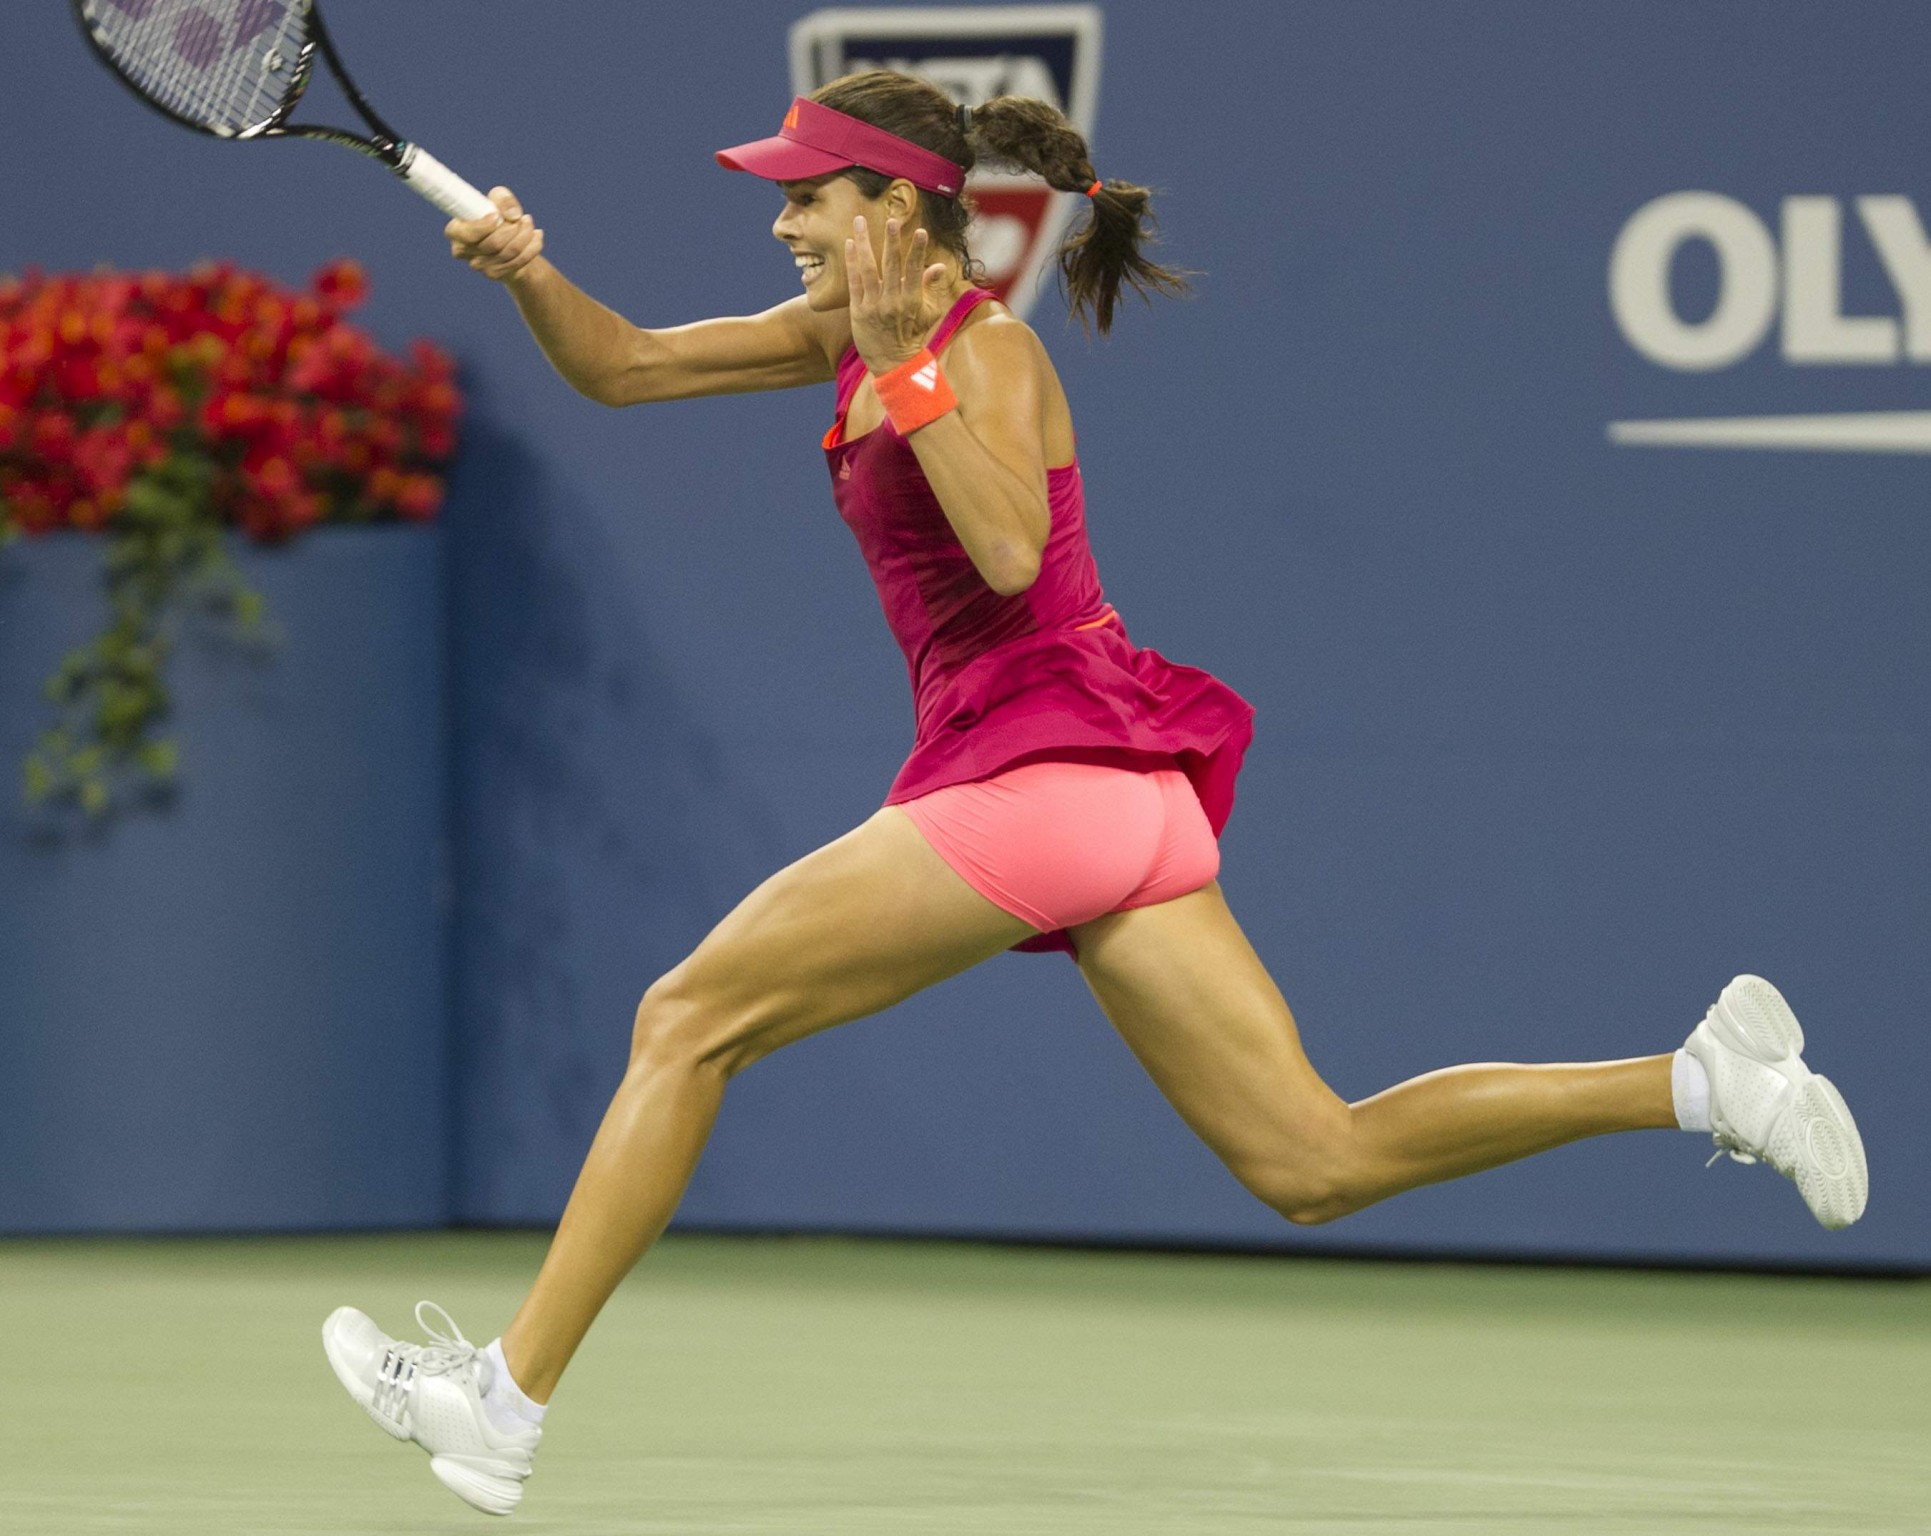 Ana Ivanovic showing cameltoe at the US Open in New York #75289047